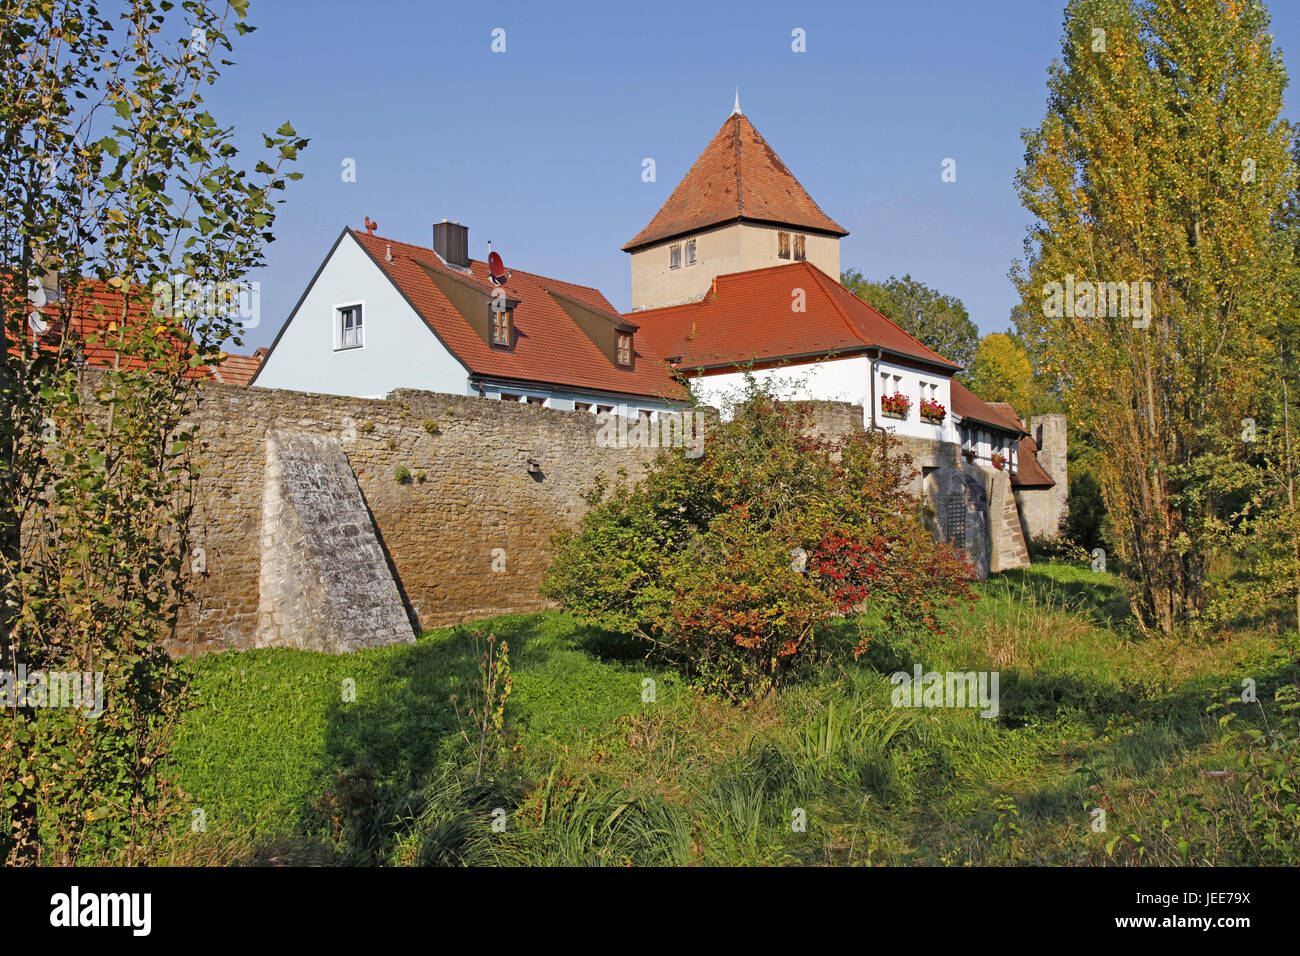 Germany, Bavaria, Lower Franconia, Iphofen, tenth tower with pest gate, defensive wall, goal attachment, city wall, franc, tenth tower, pest gate, city wall, tower, Stock Photo